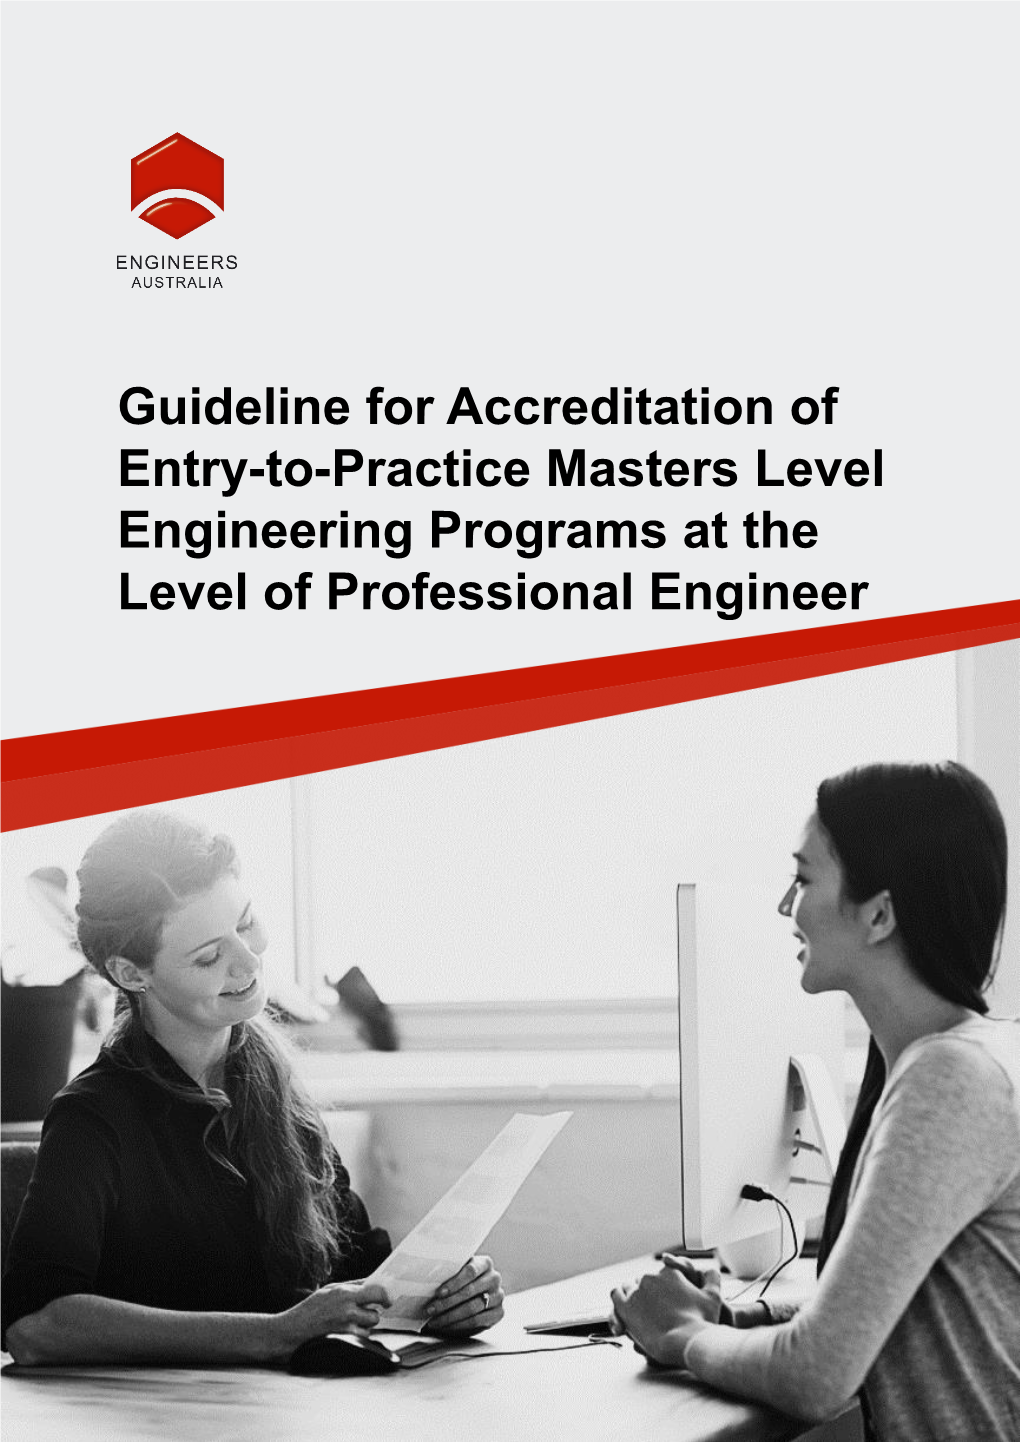 Guideline for Accreditation of Entry-To-Practice Masters Level Engineering Programs at the Level of Professional Engineer